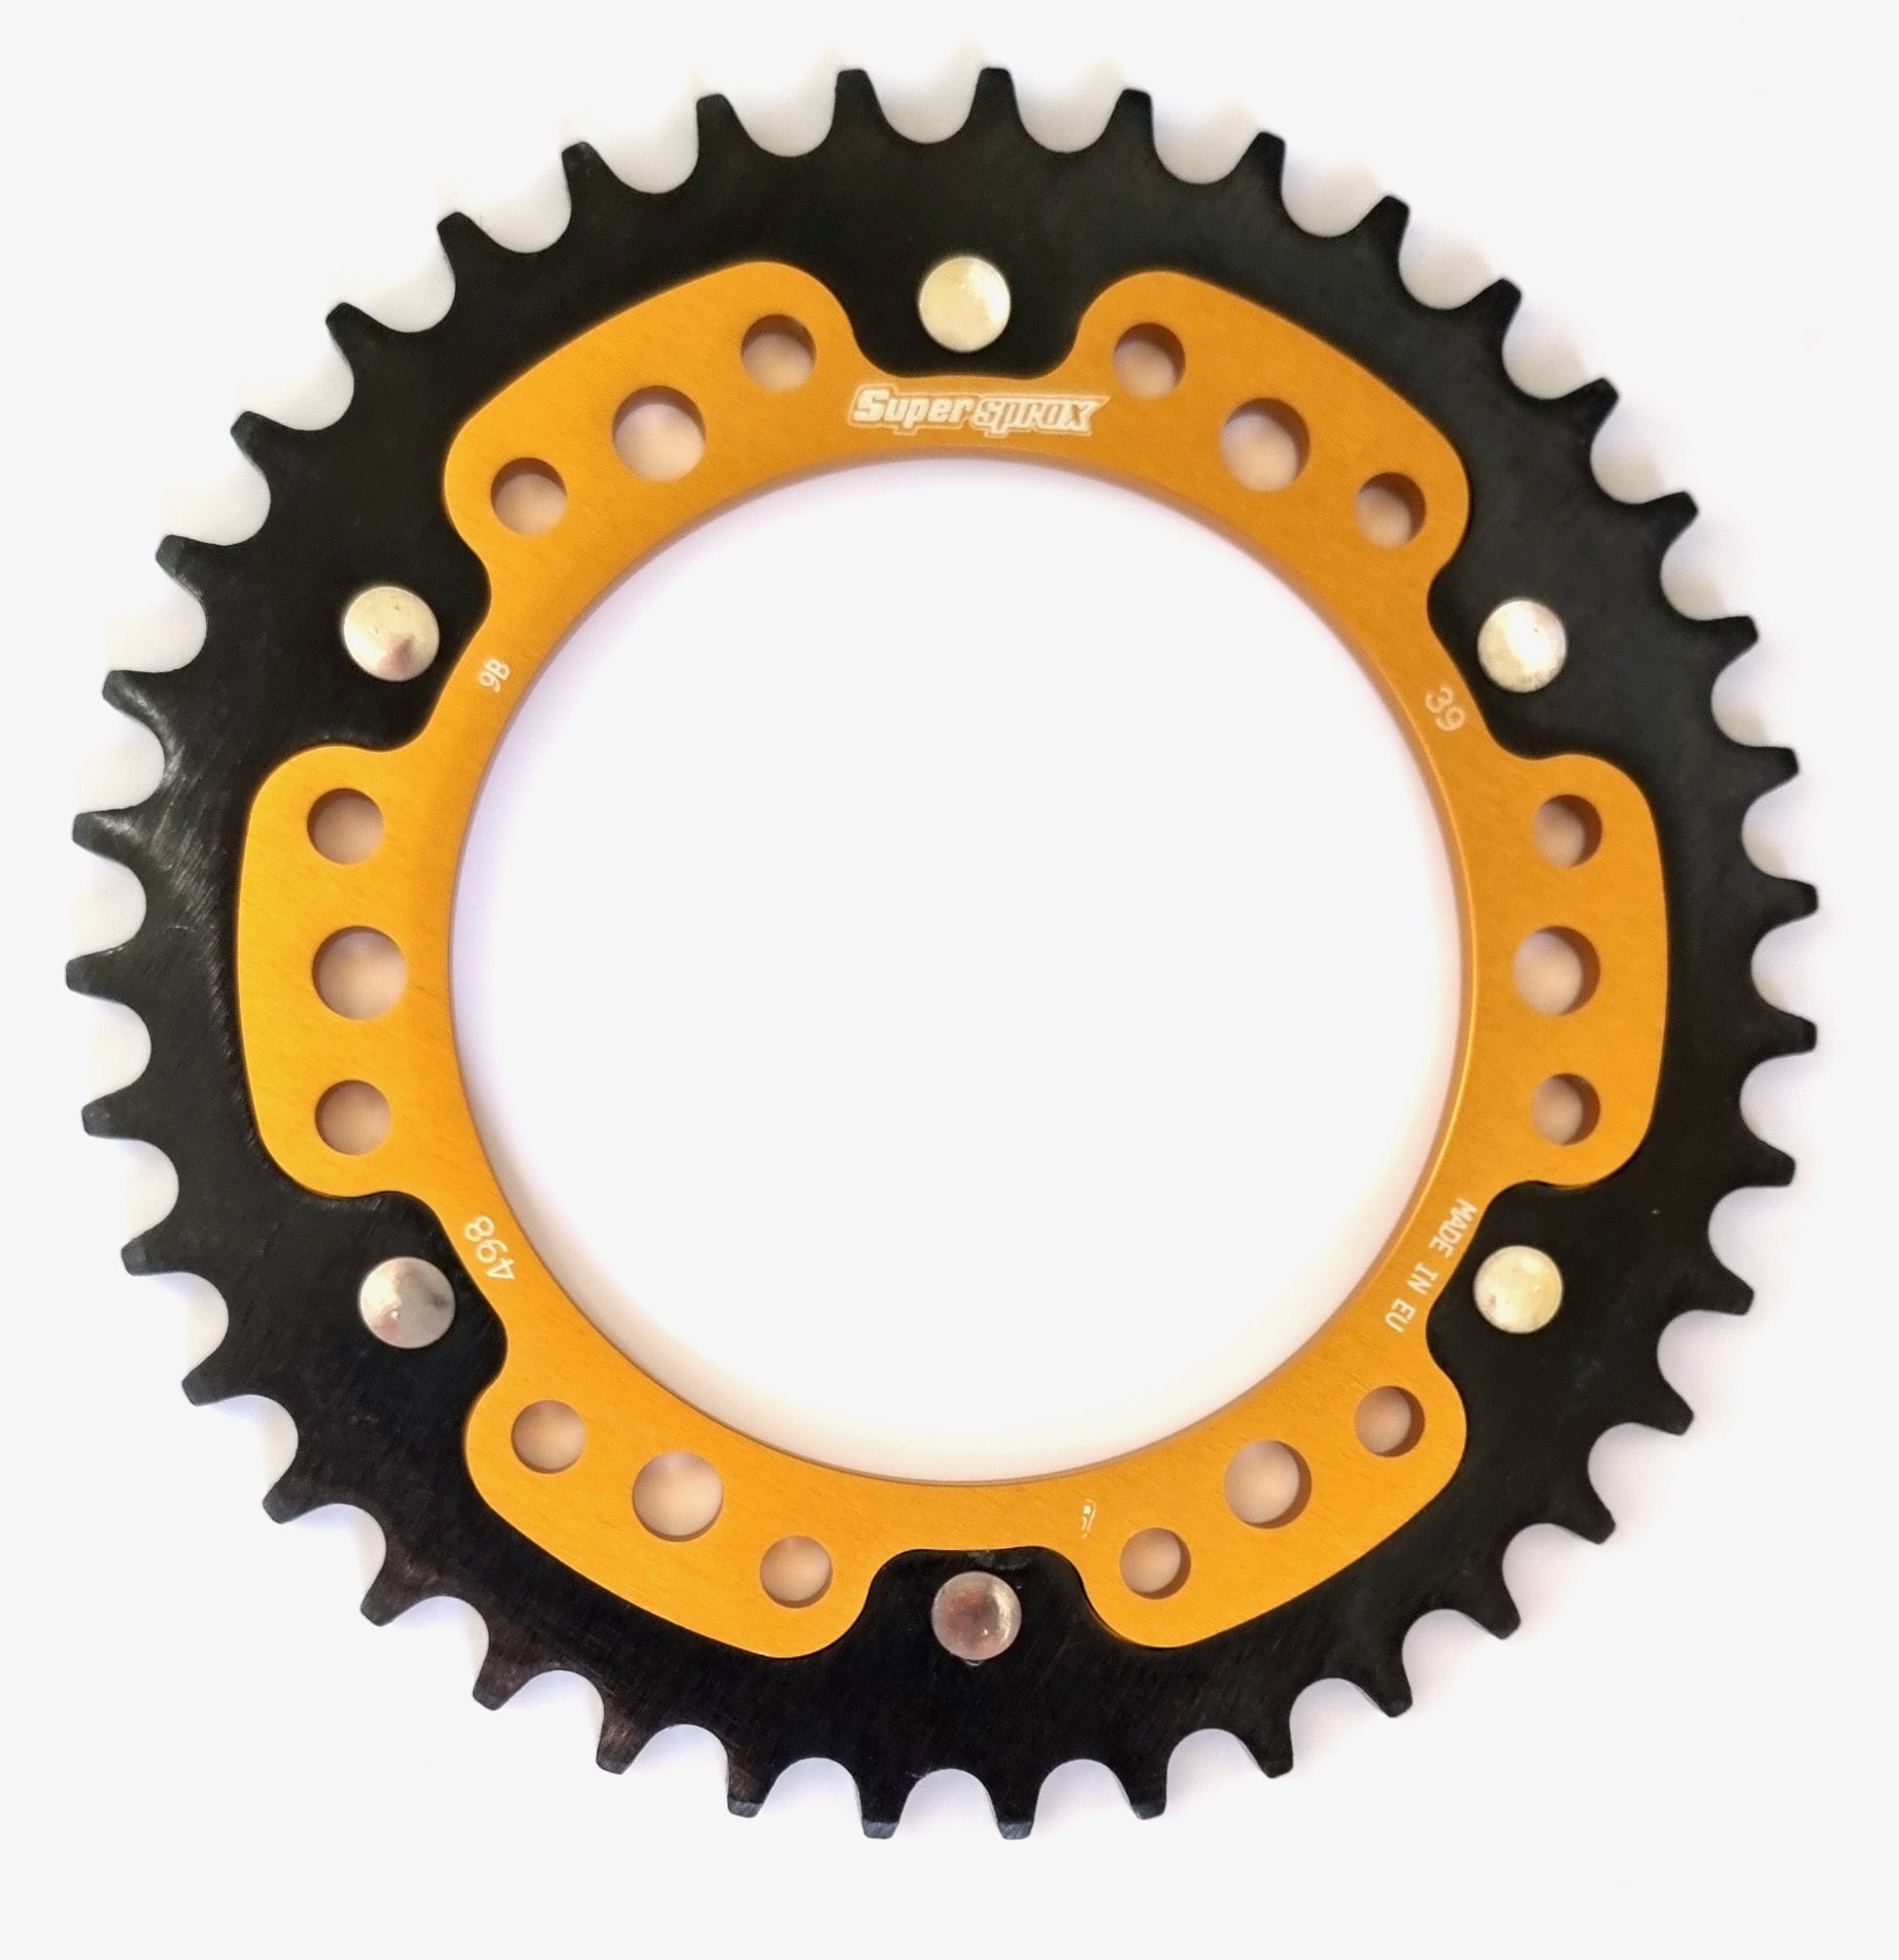 RST-498:39-GLD Supersprox Stealth Sprocket in Gold for Dymag wheels WSC Performance